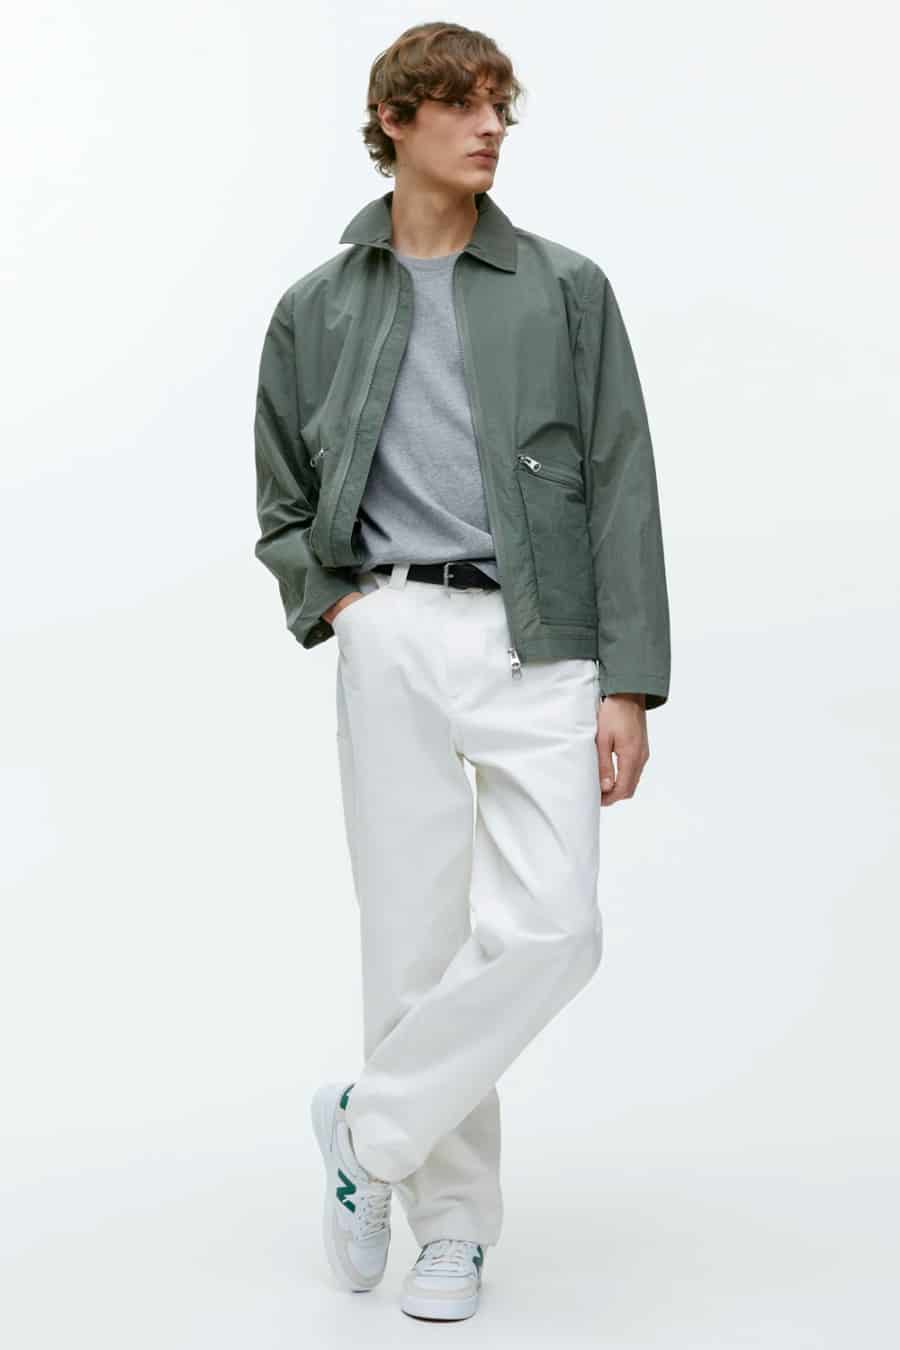 Men's white pants, grey T-shirt, green jacket and white sneakers outfit